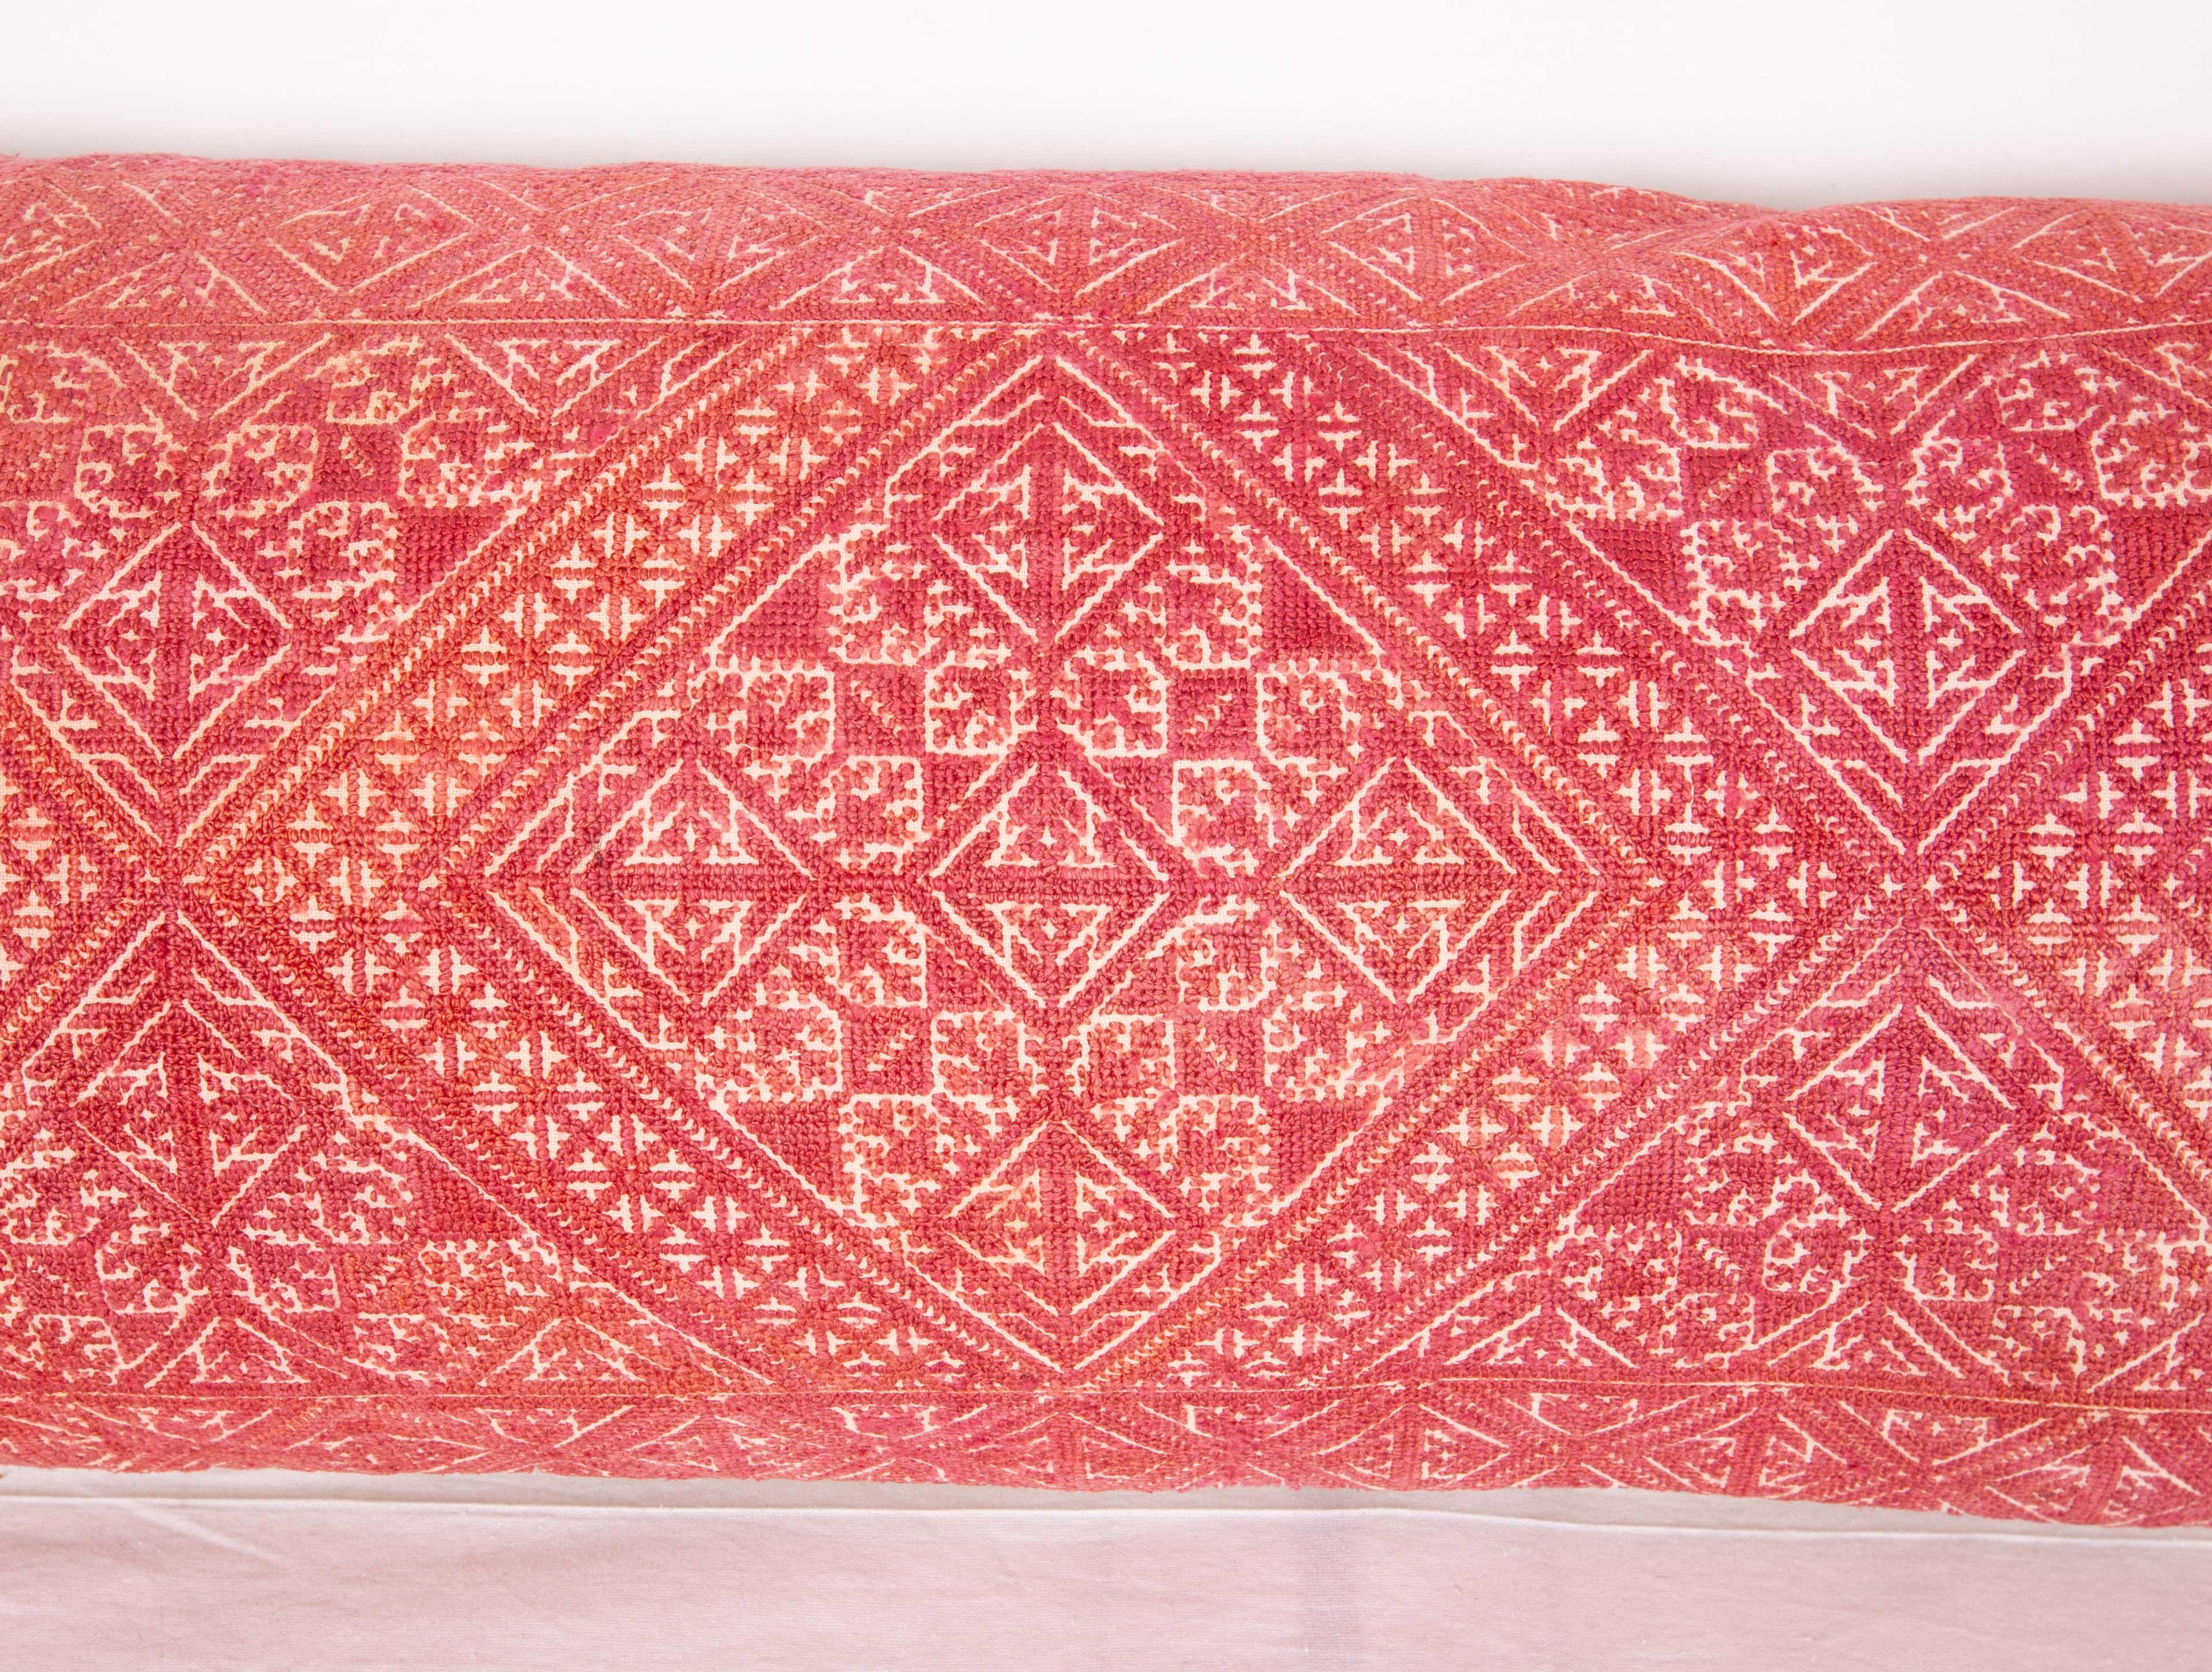 Suzani Antique Lumbar Pillow Case Made from an Early 20th Century Fez Embroidery